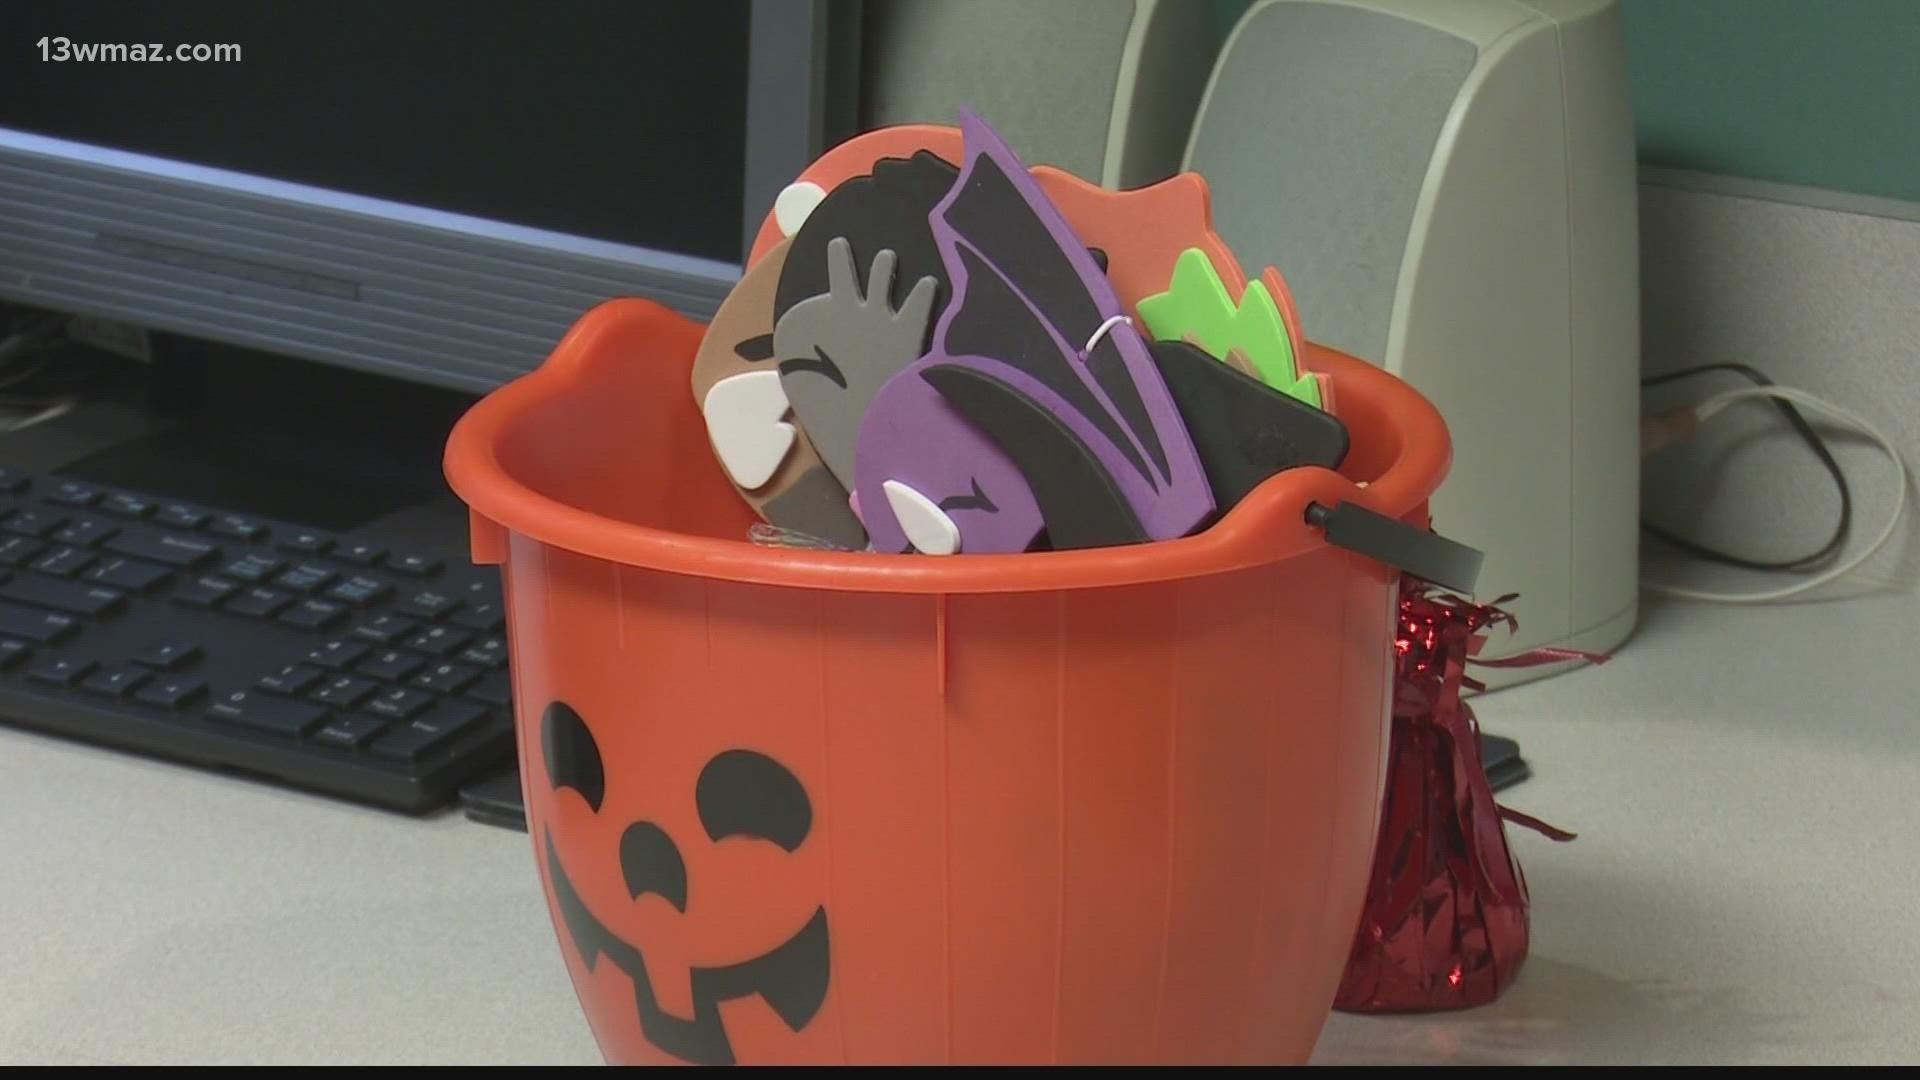 Halloween may be over, but there's still a lot of candy around. Macon Smiles, a dental practice in Macon, will pay up for your candy pile.